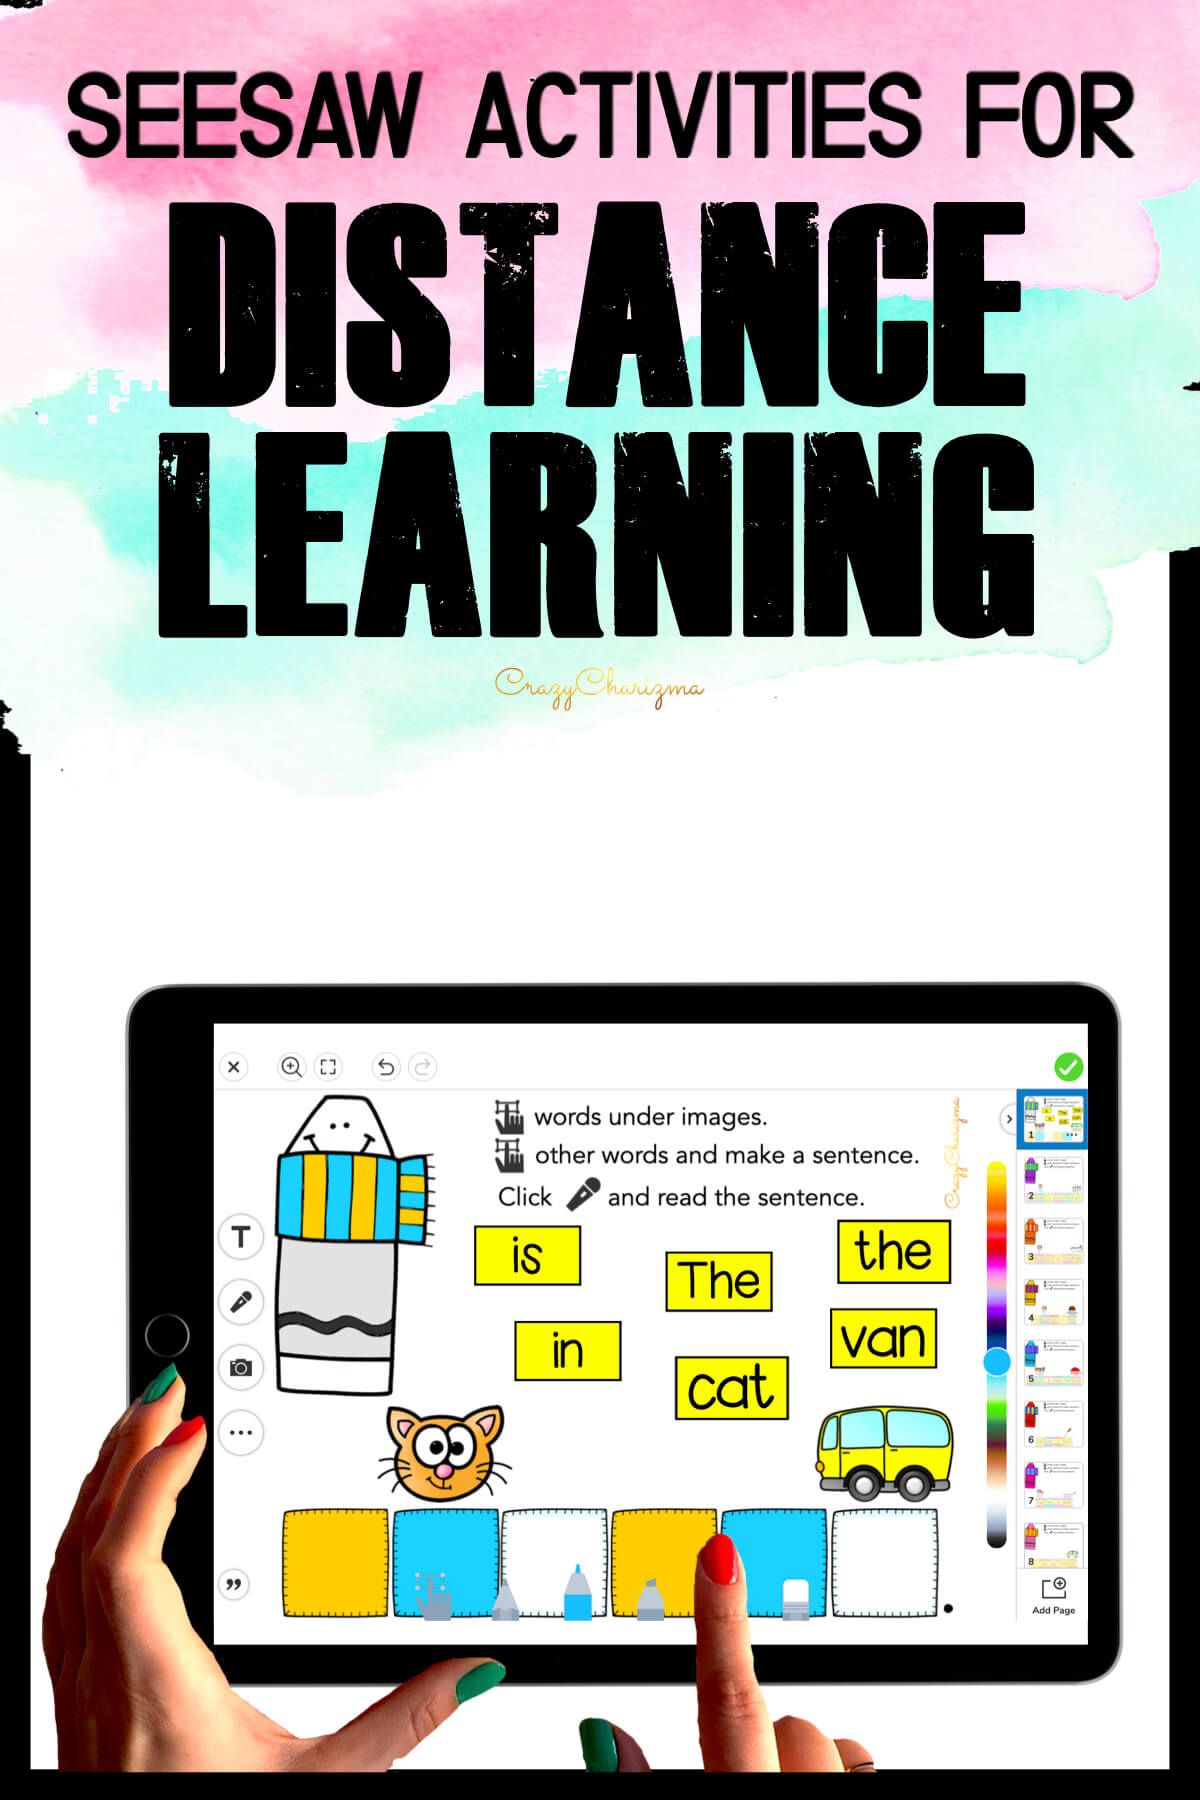 Need fun activities to use in Seesaw? Looking for engaging practice for distance learning? Try reading paperless phonics sentences with crayons. Perfect for kindergarten, first and second grade!